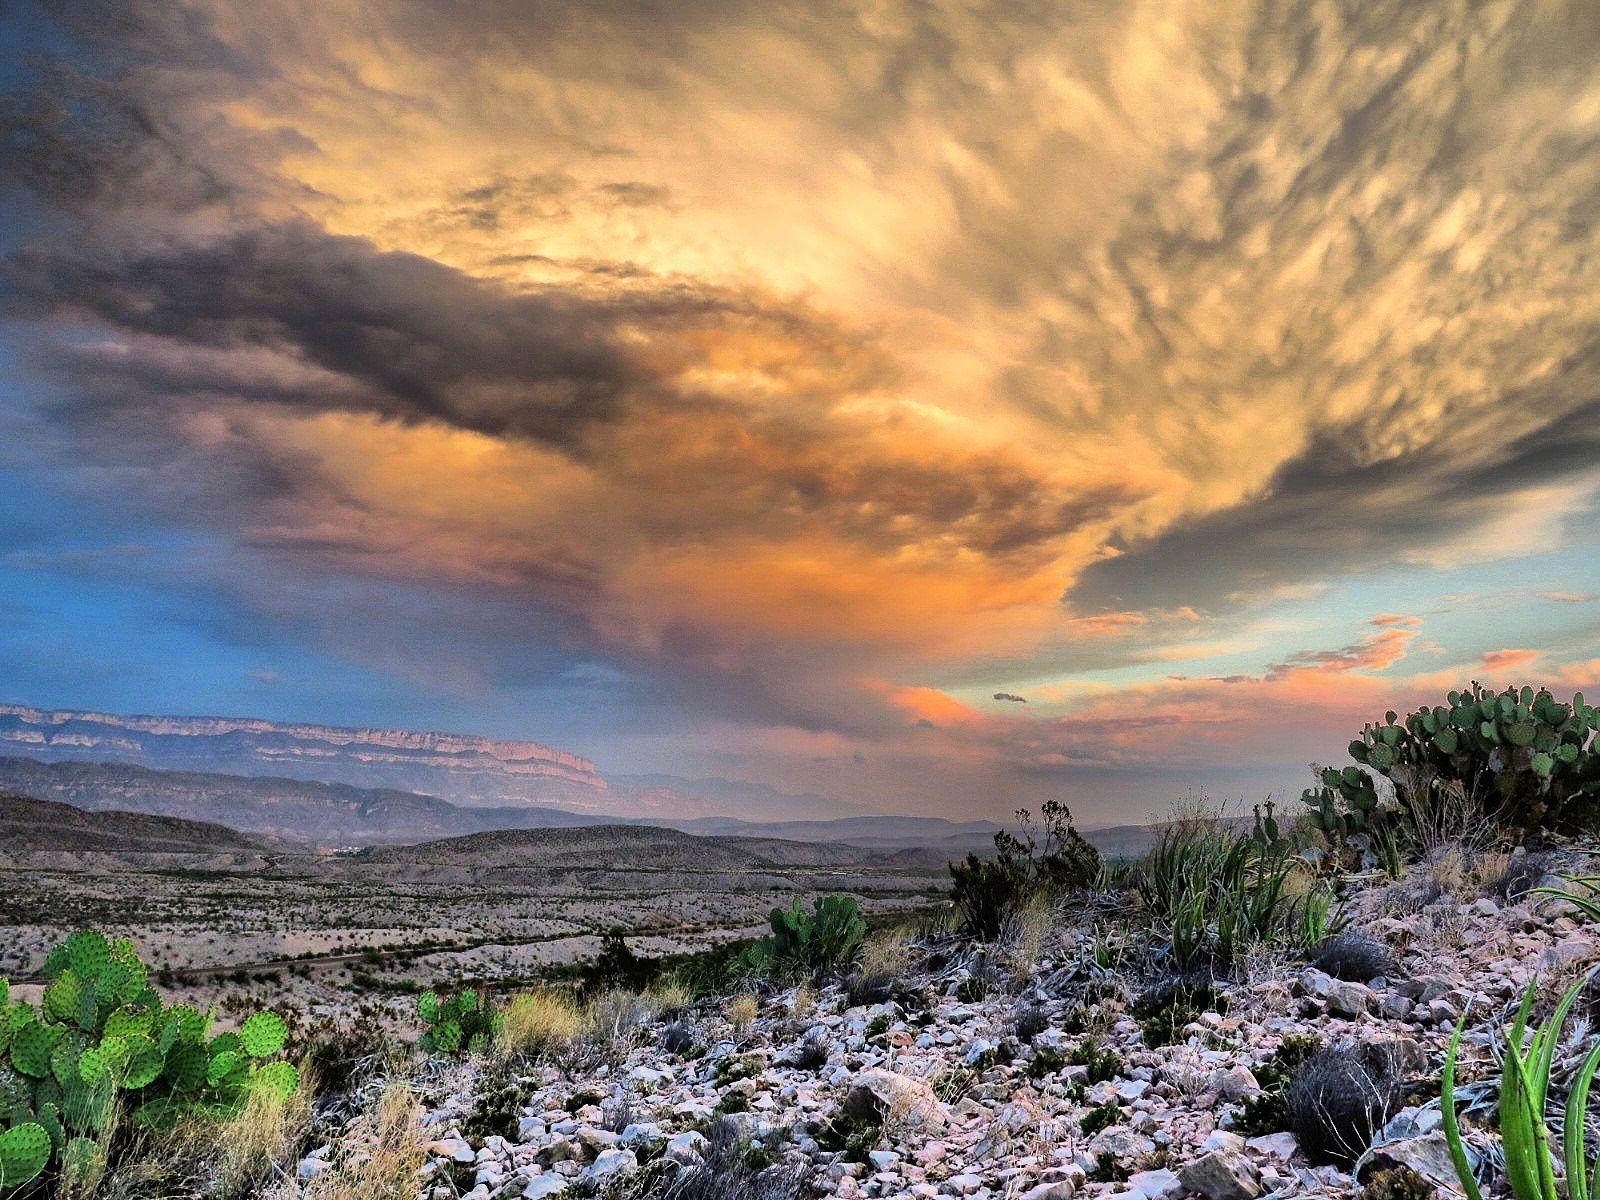 Today's sunset in Big Bend National Park, Texas HD Wallpaper From